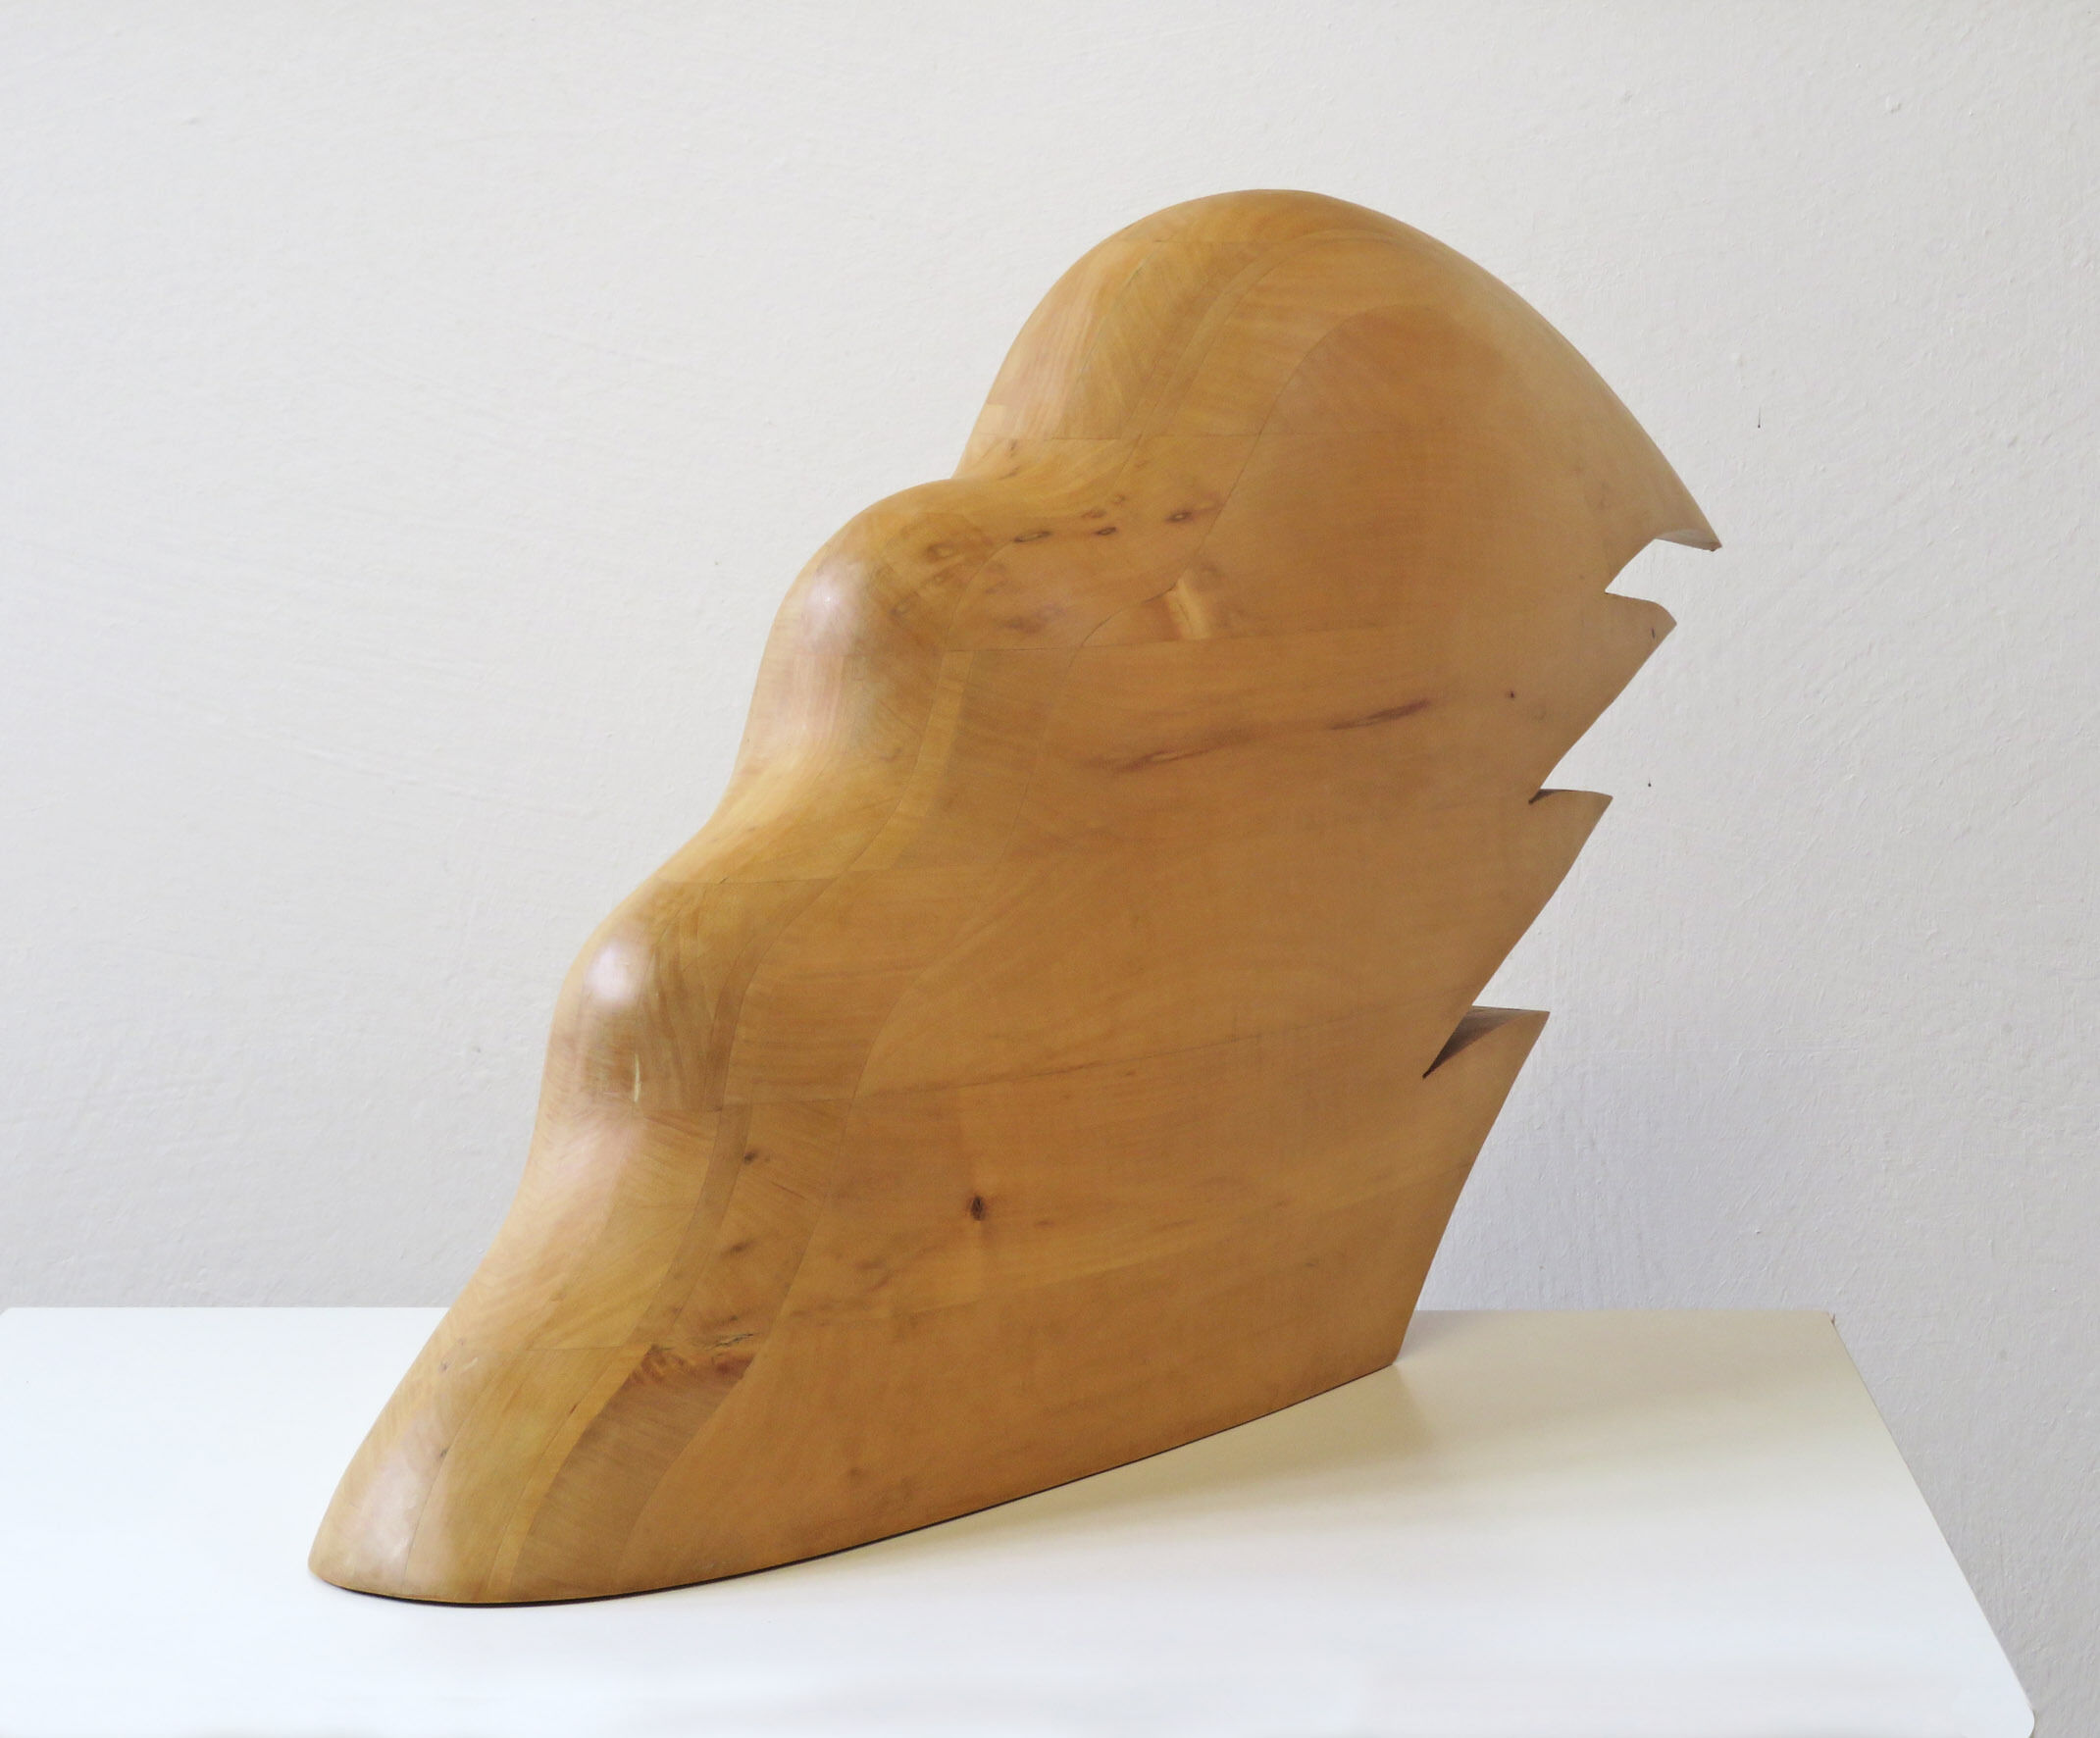 Sculpture "Head blown by the wind" (2016)